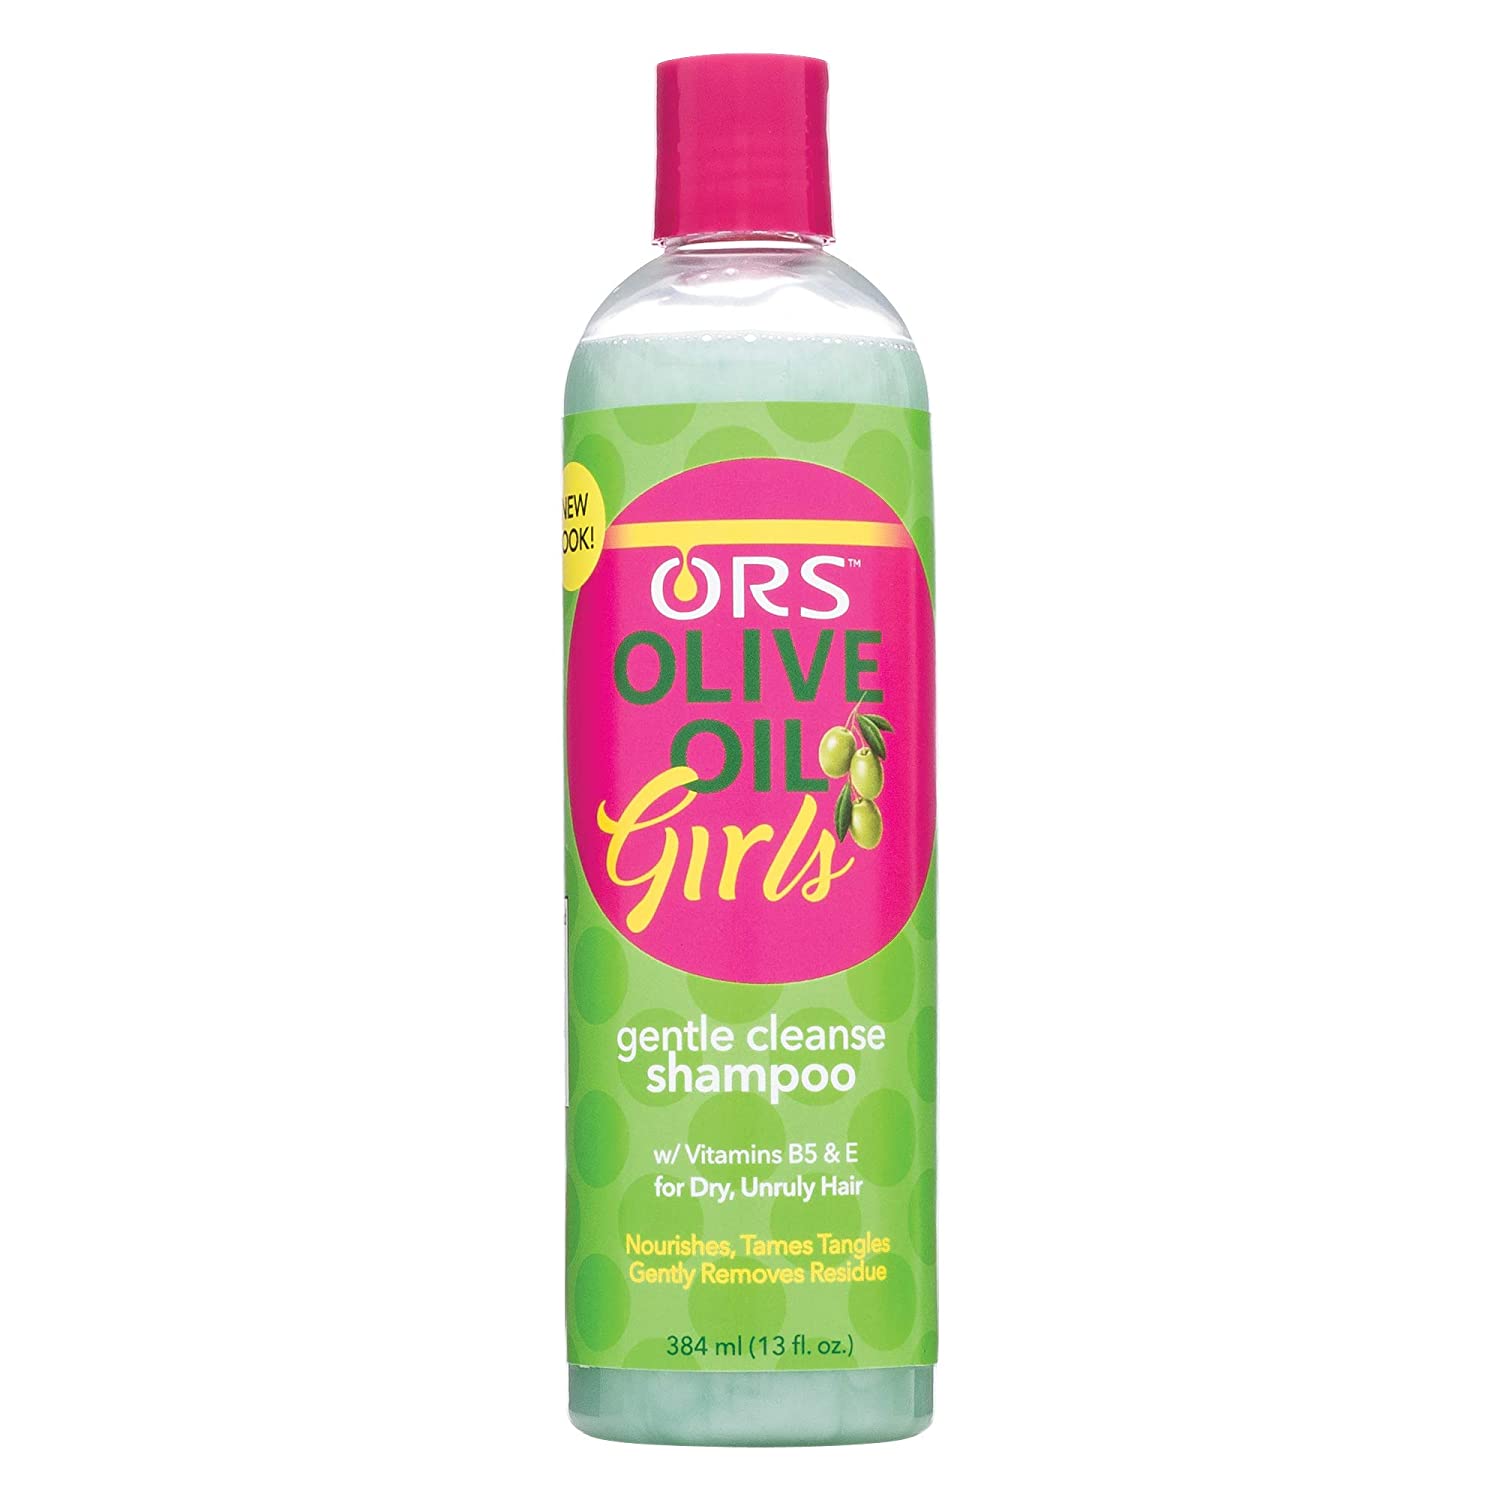 ORS Olive Oil Girls- Gentle Cleanse Shampoo